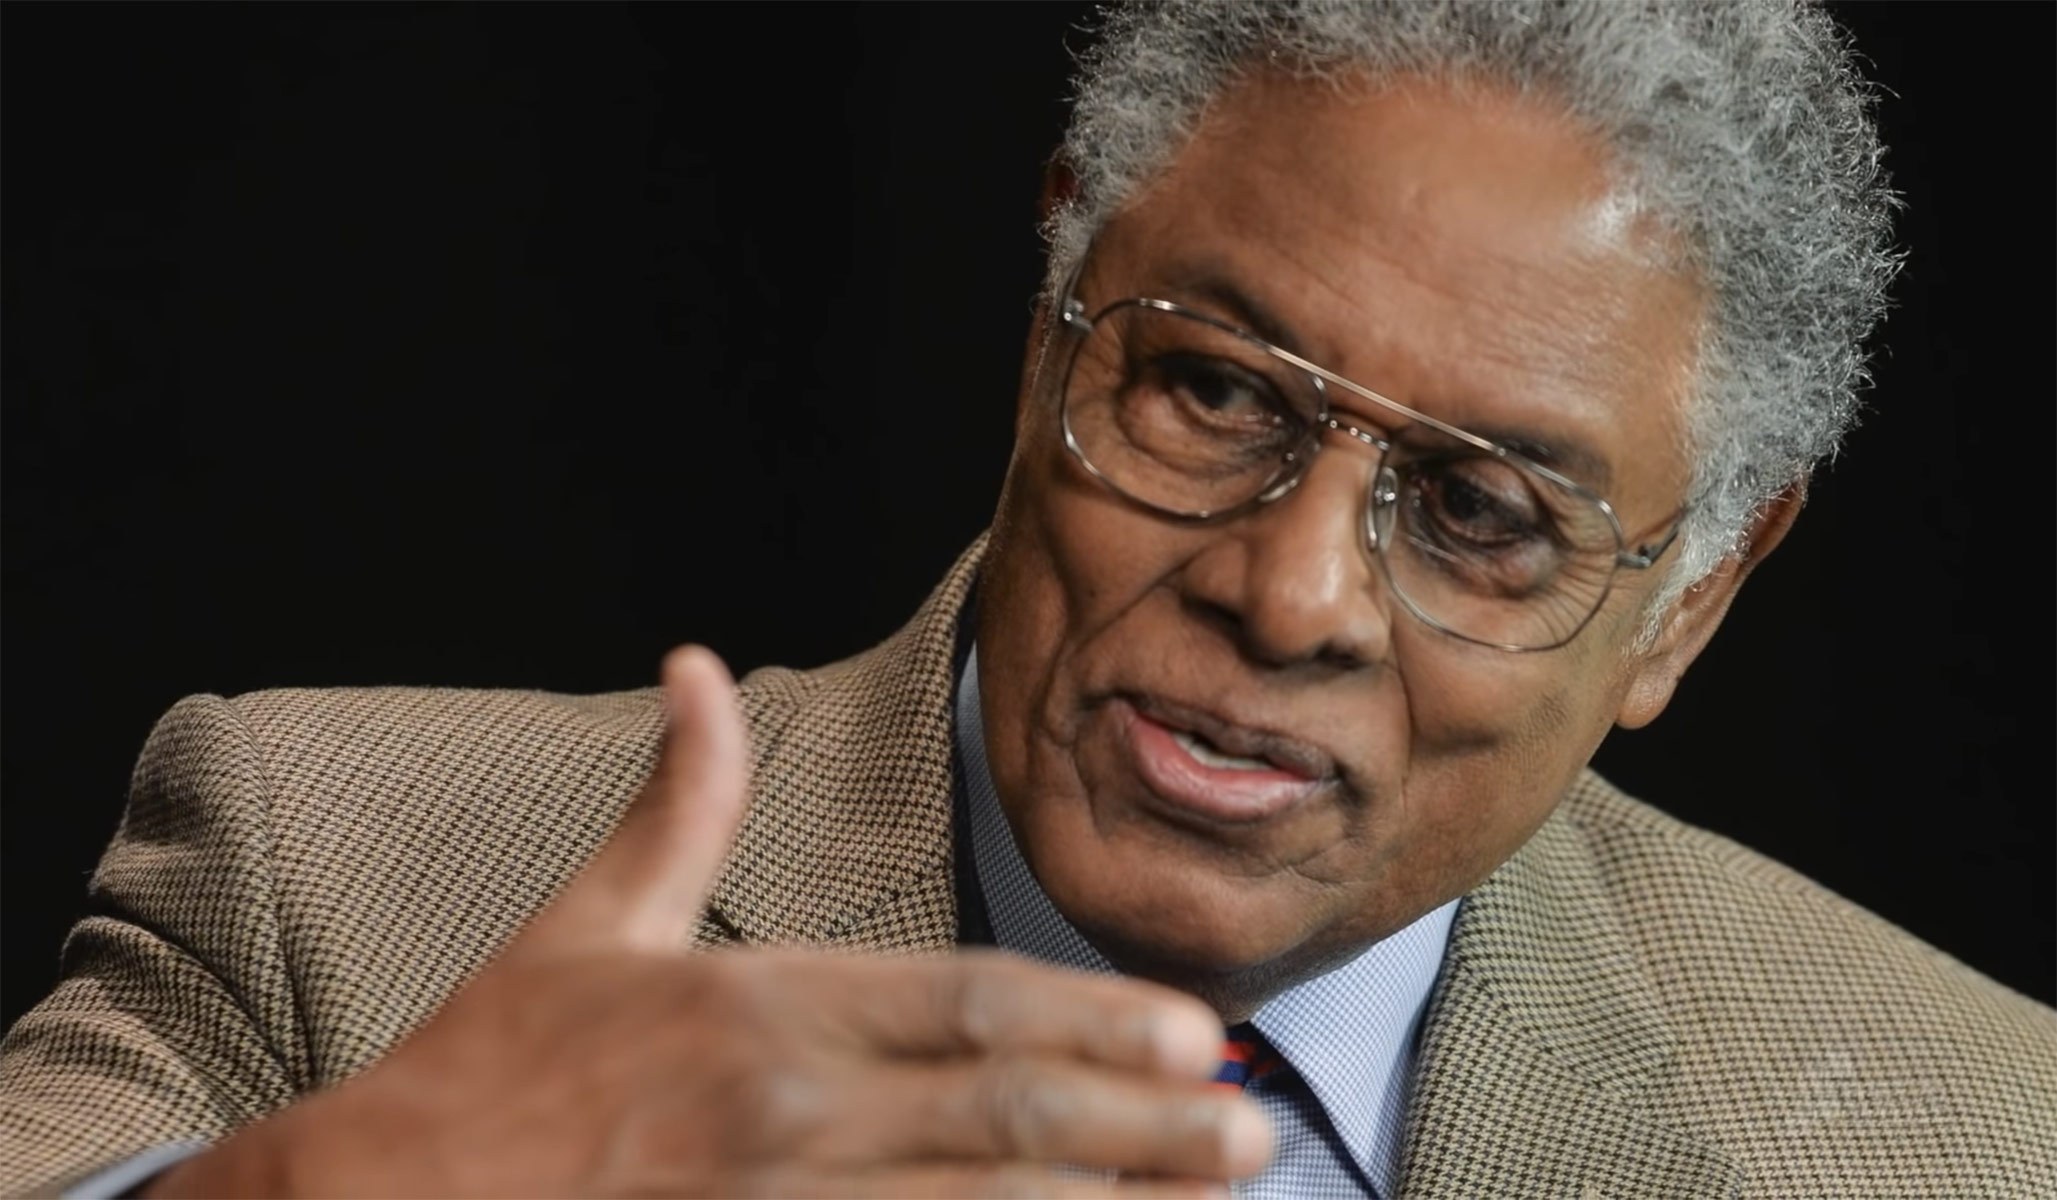 The triumph of Thomas Sowell